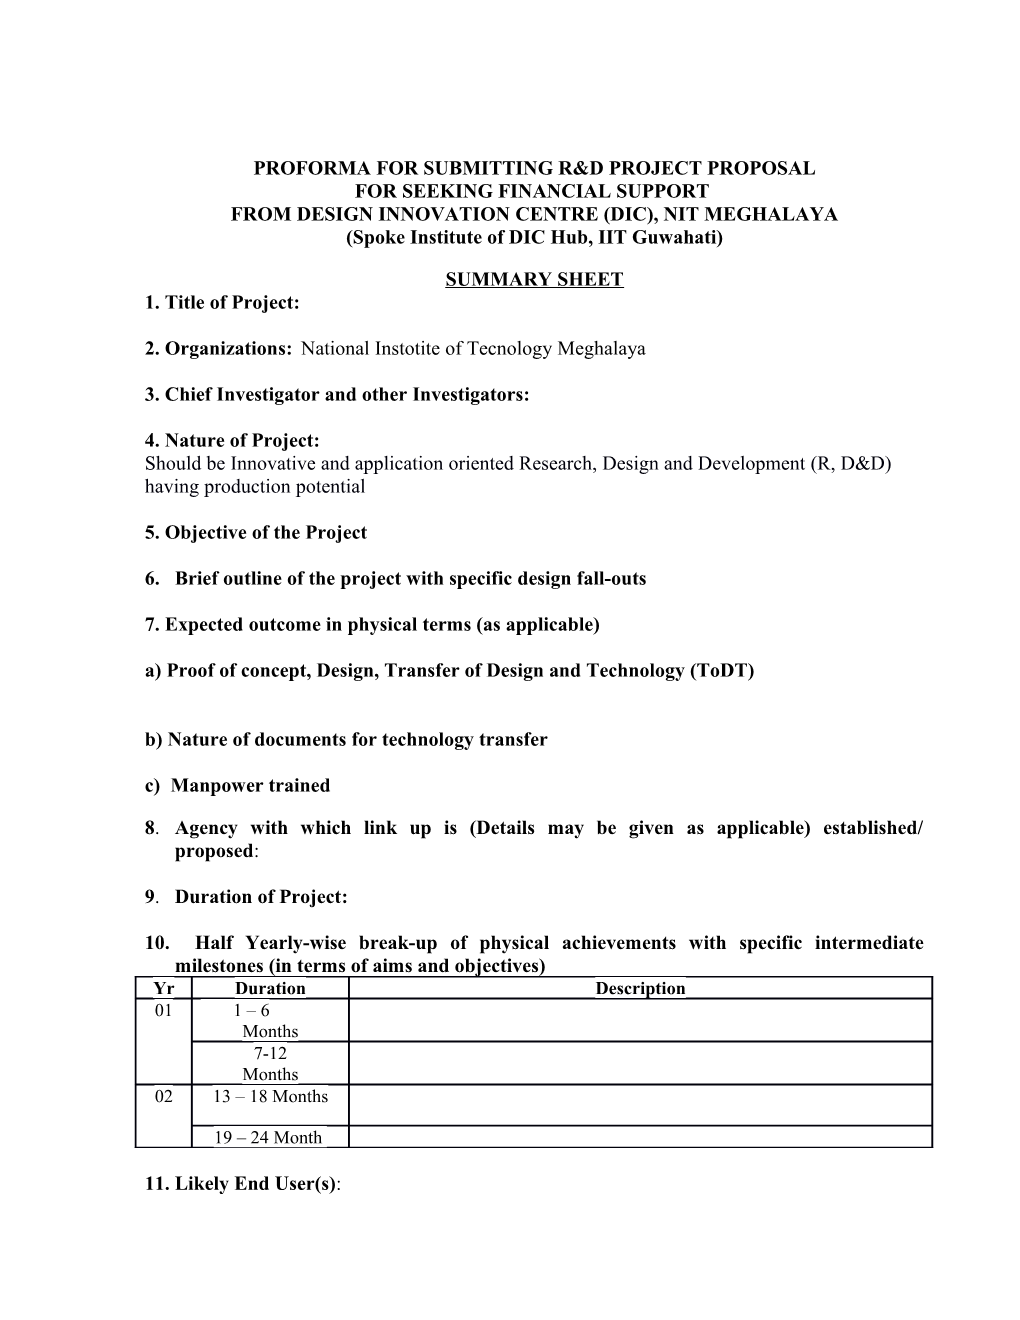 Proforma for Submitting R&D Project Proposal